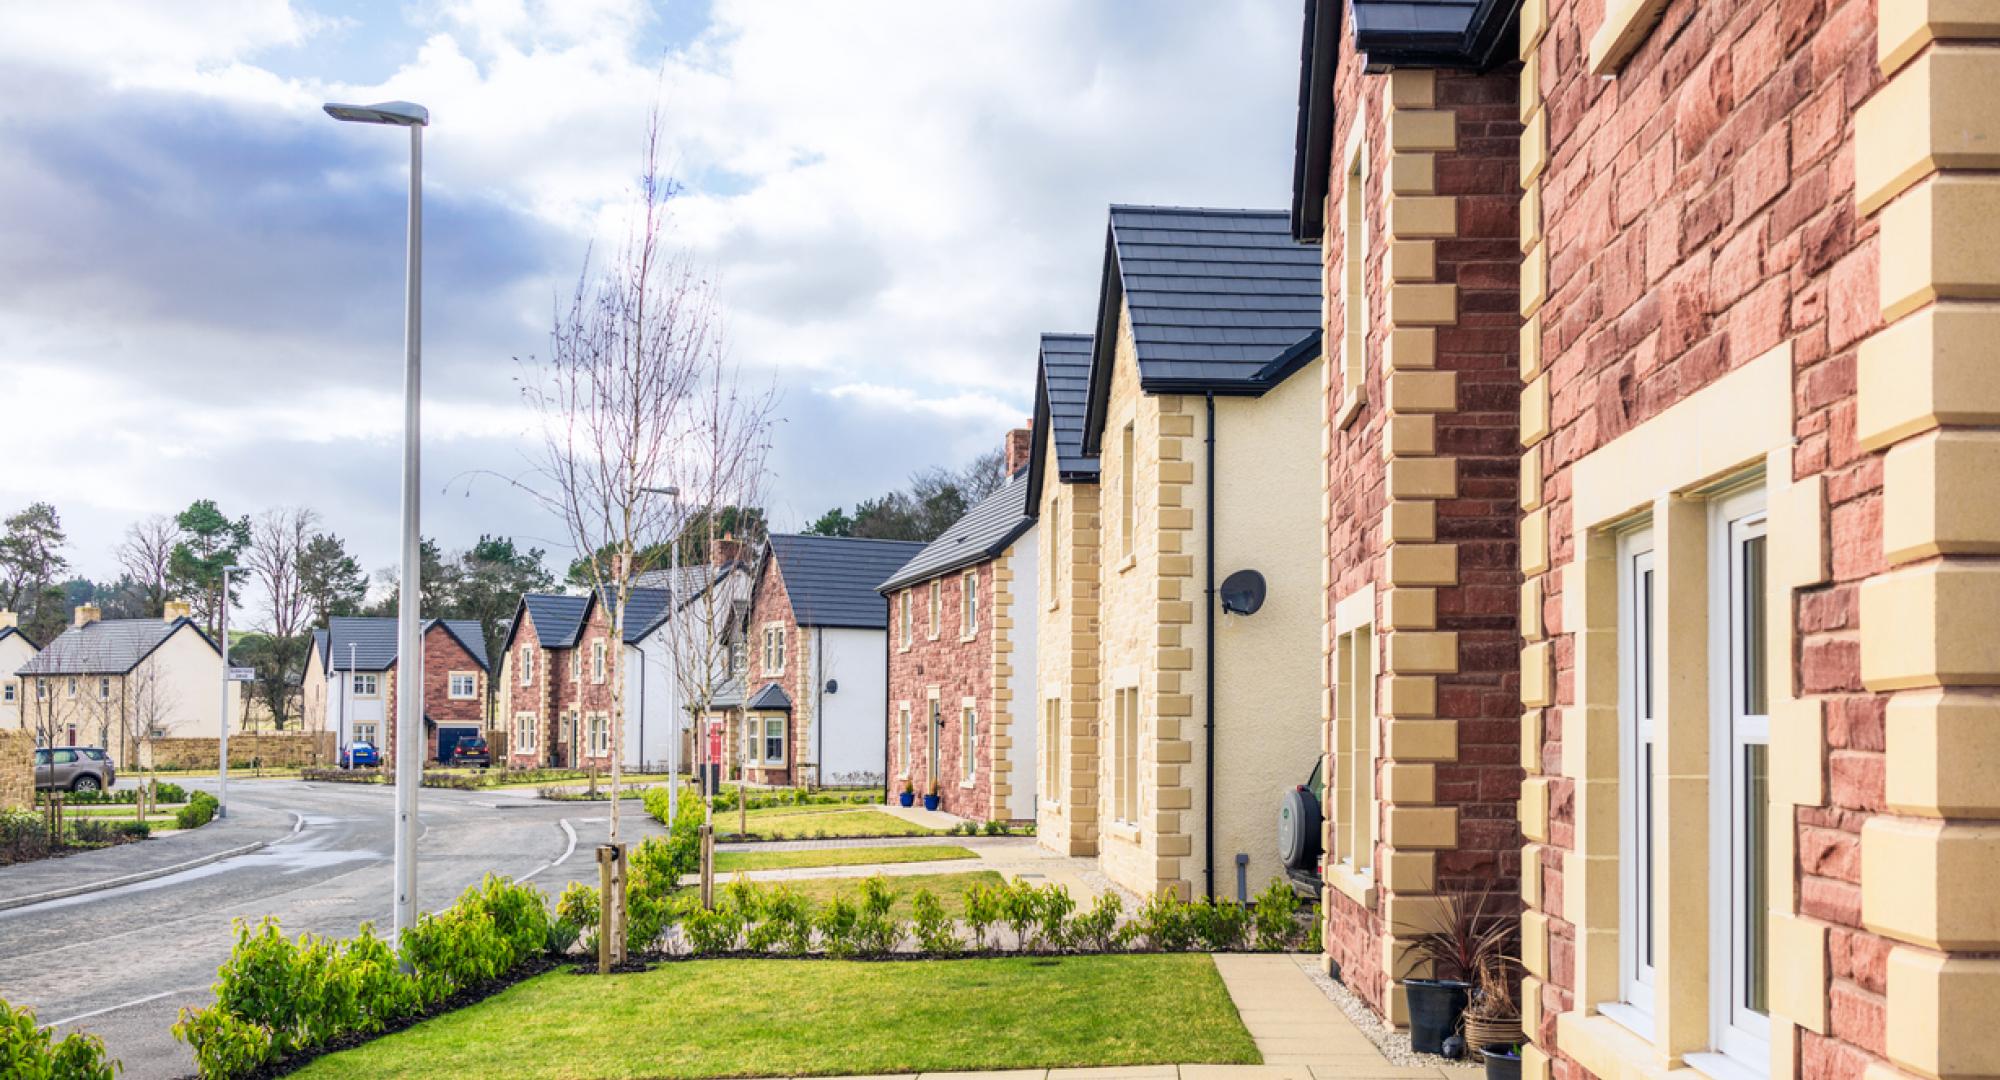 New homes in england